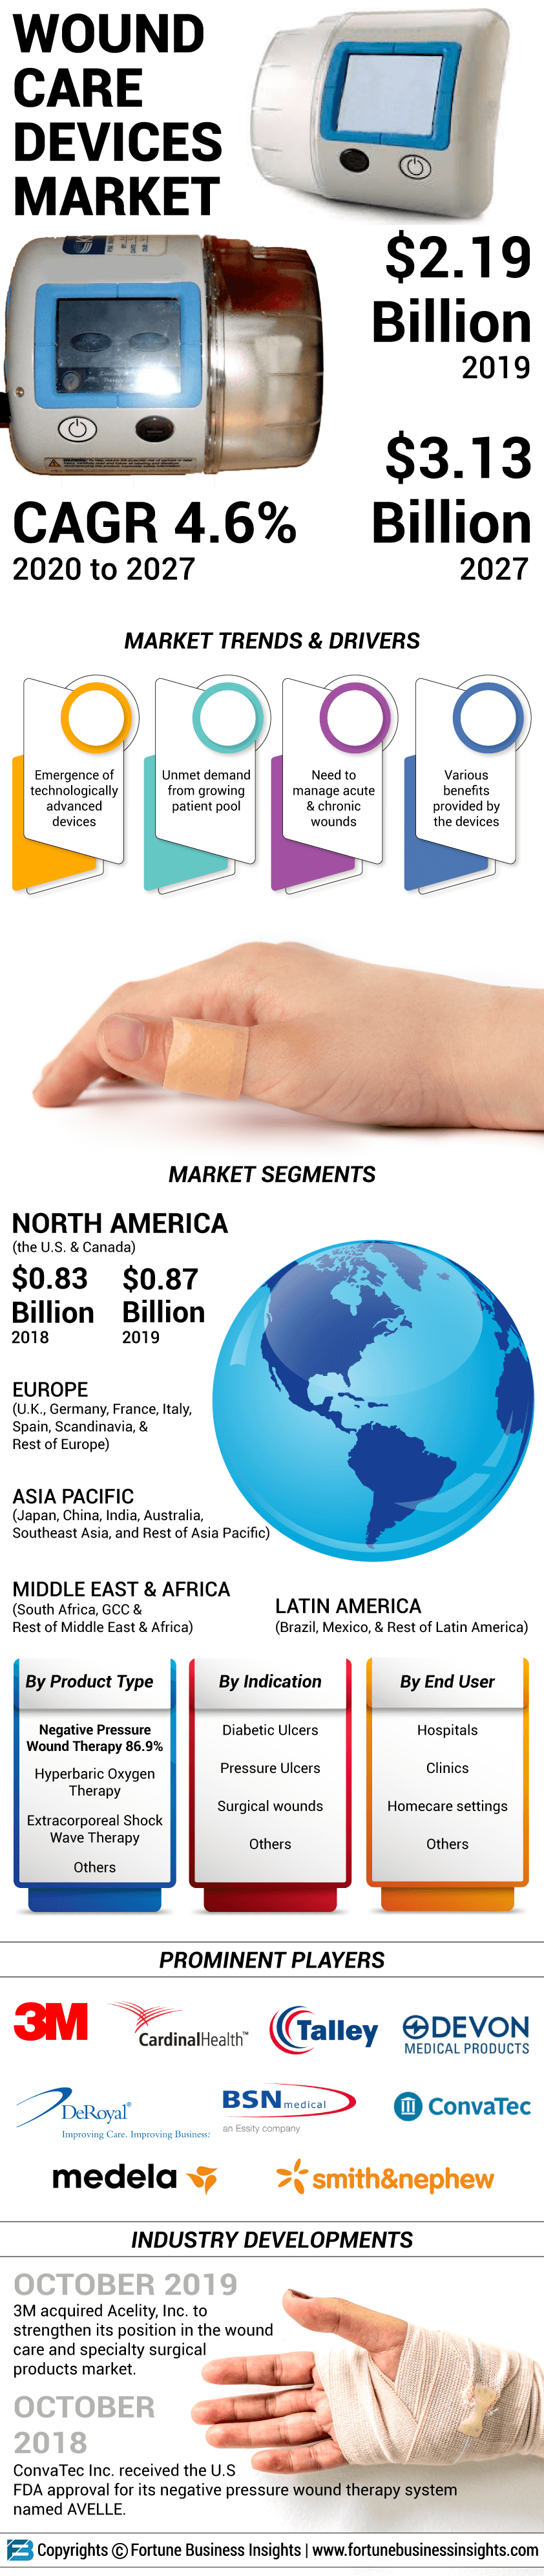 Wound Care Devices Market